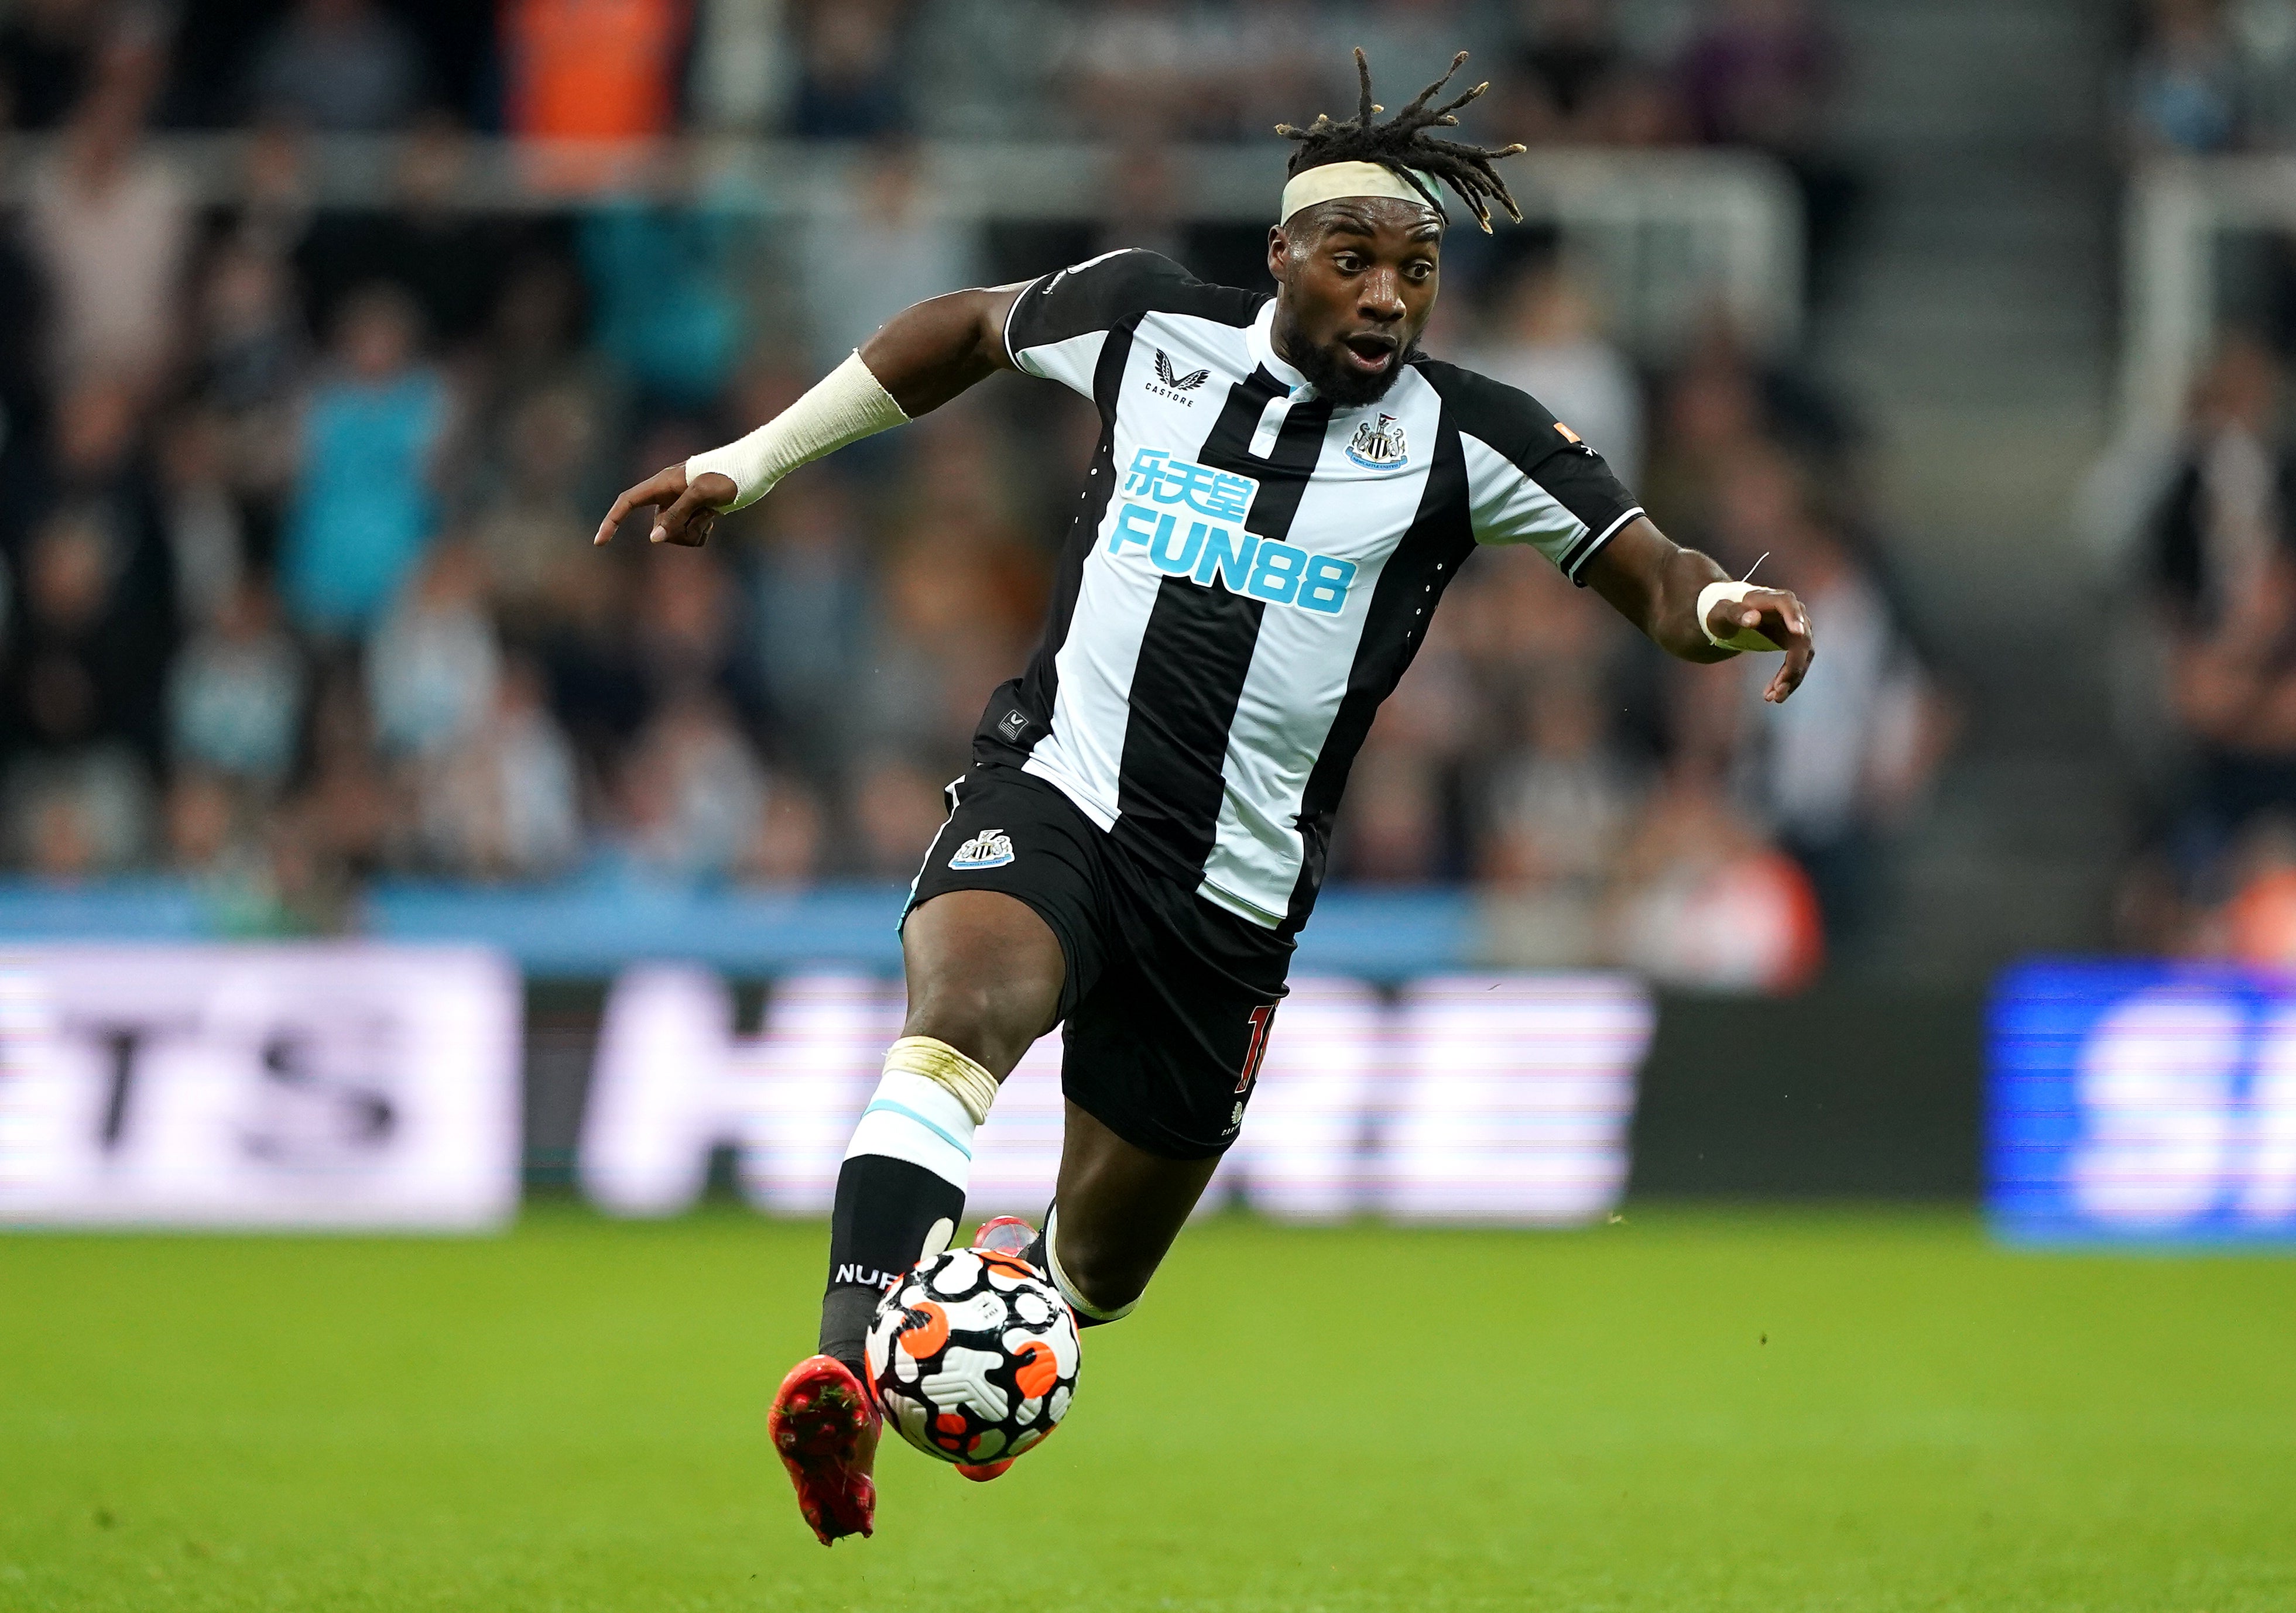 Newcastle fans will be hoping for more players of the quality of Allan Saint-Maximin following the takeover (Owen Humphreys/PA)